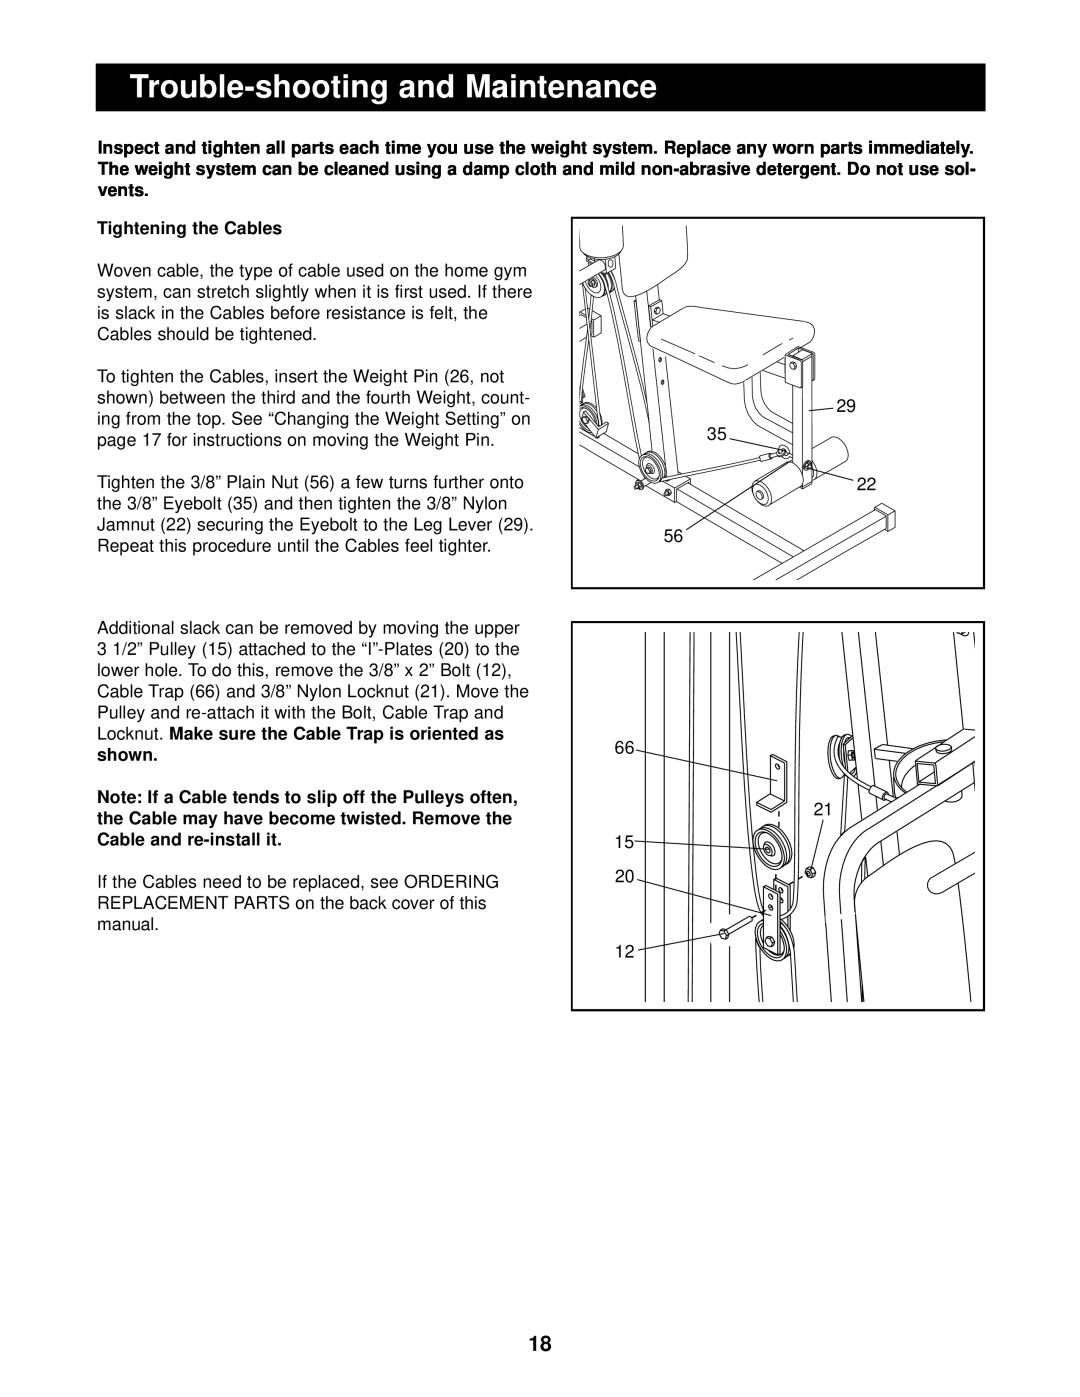 Weider 740 user manual Trouble-shooting and Maintenance, Tightening the Cables, Cable and re-install it 